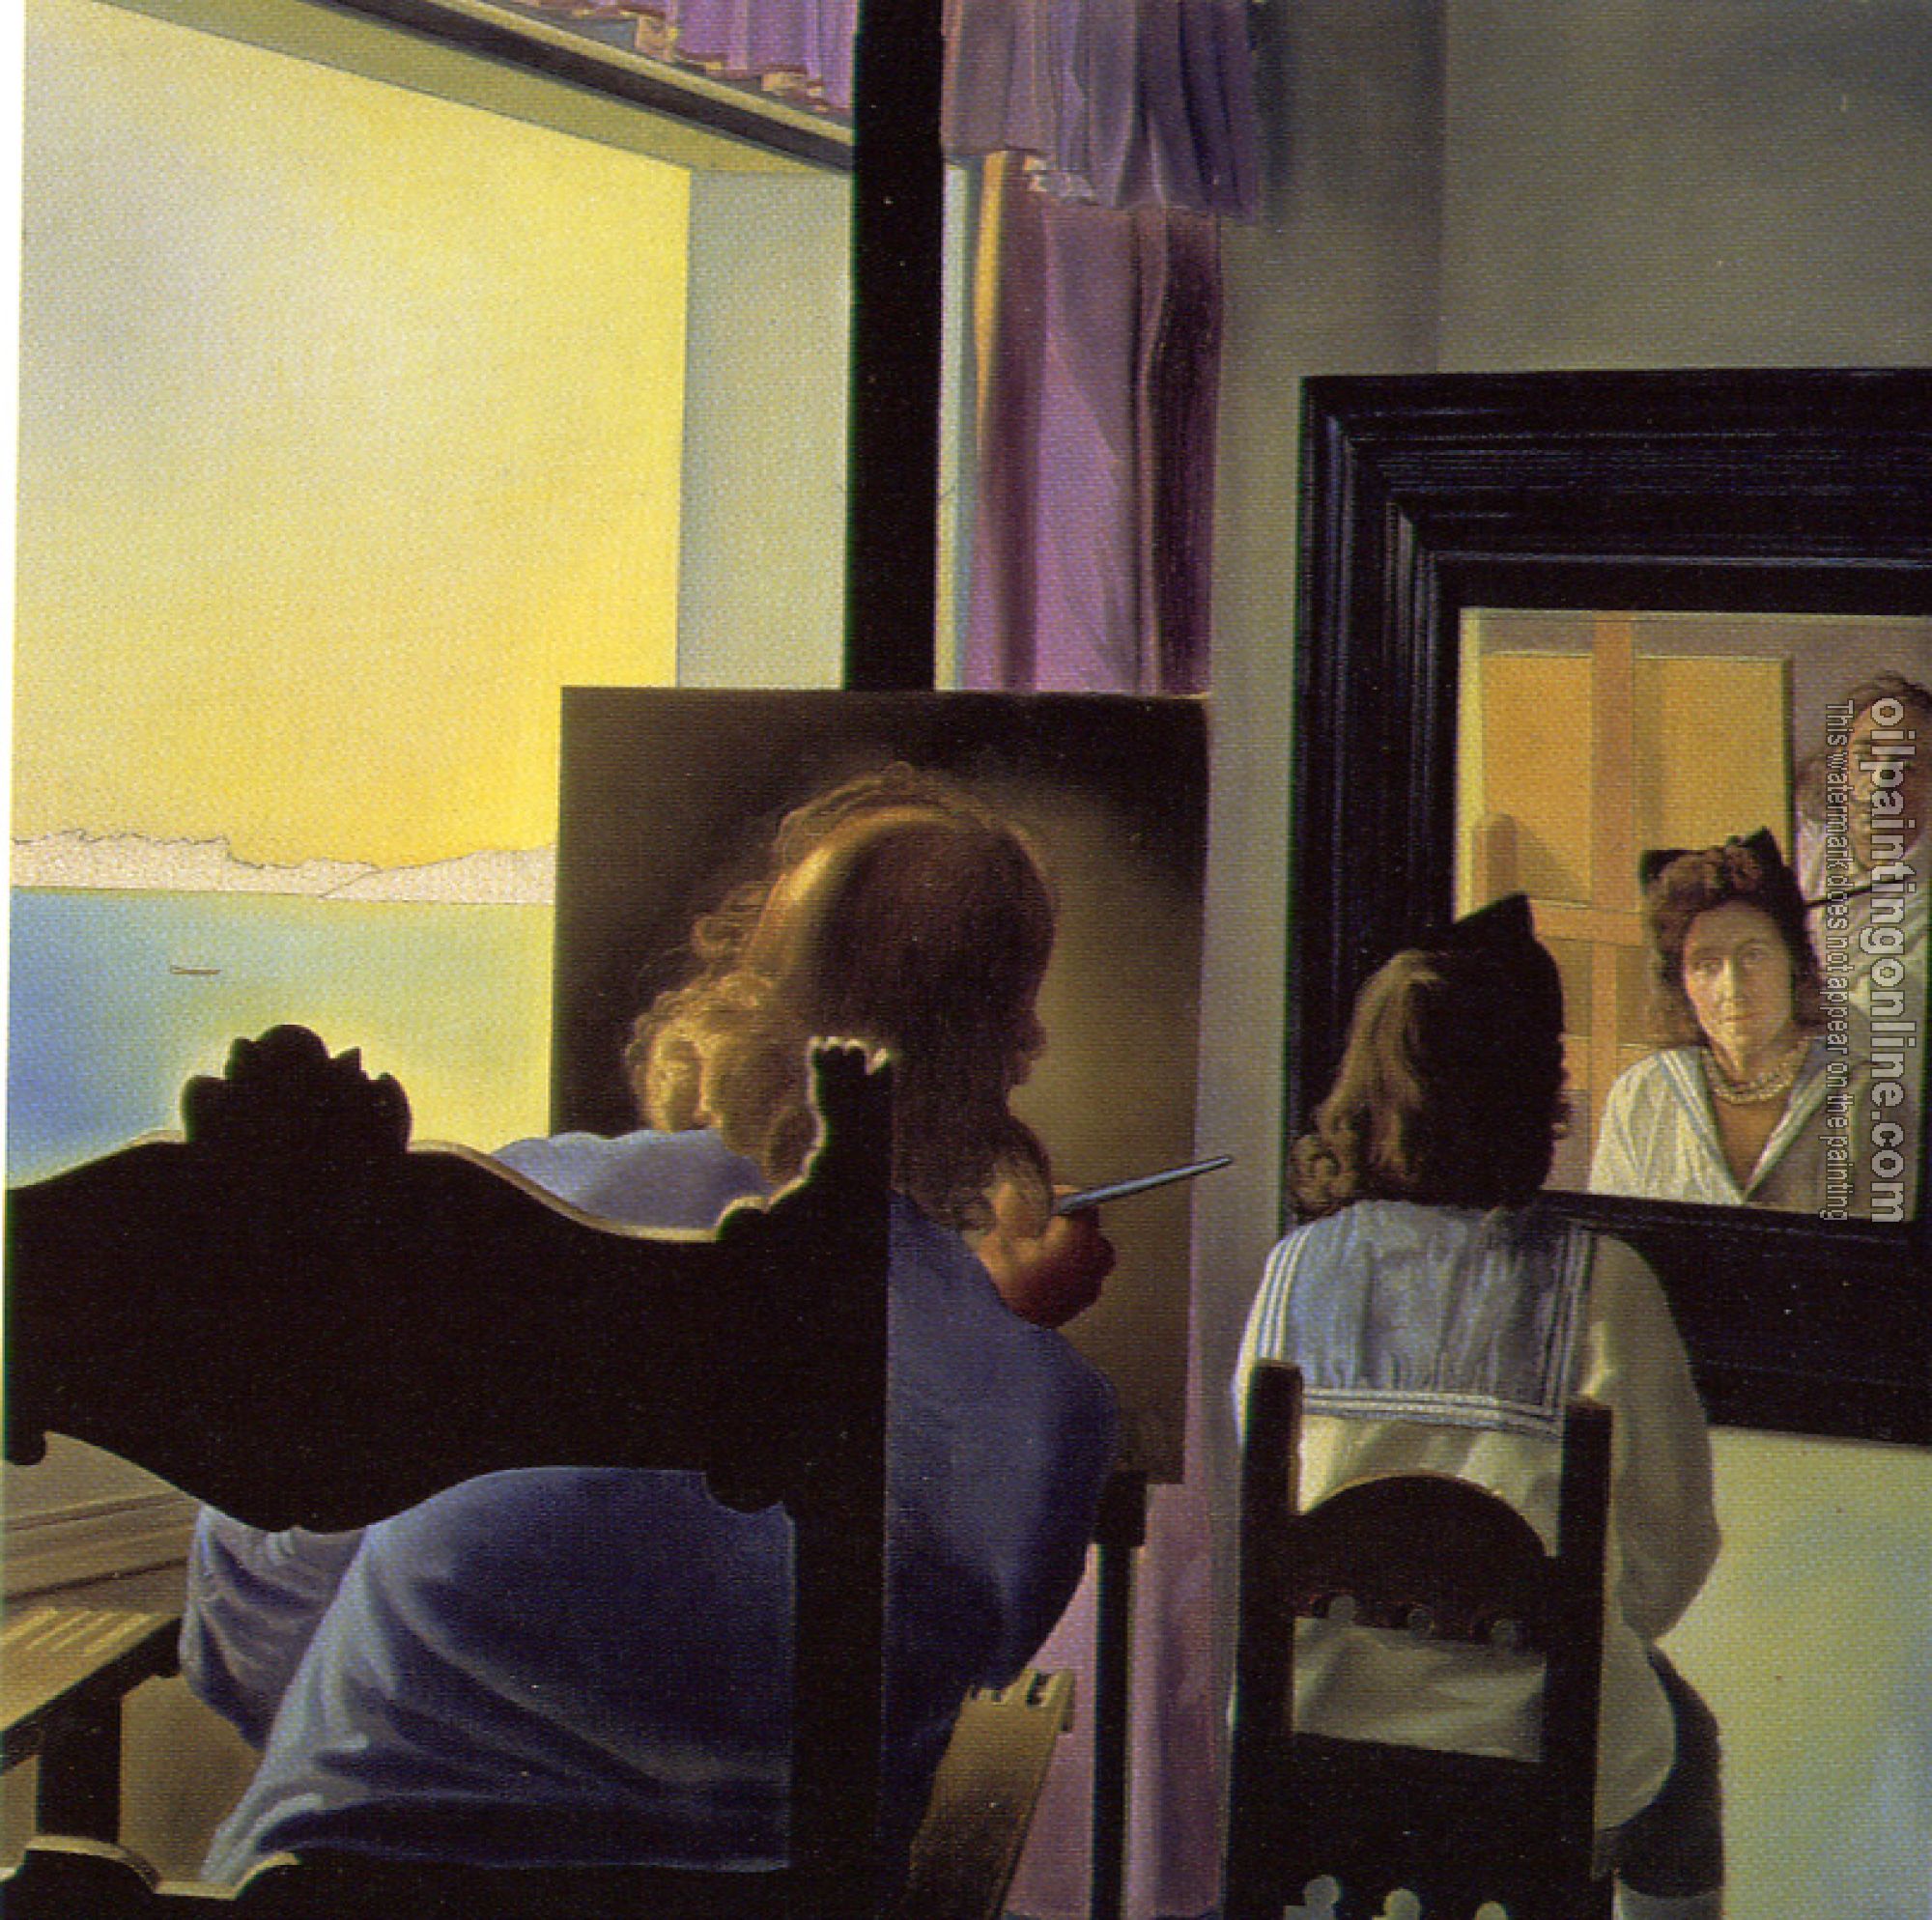 Dali, Salvador - Dali from the Back Painting Gala from the Back Eternalized by Six Virtual Corneas Provisionally Reflected in Six Real Mirrors (unfinished)